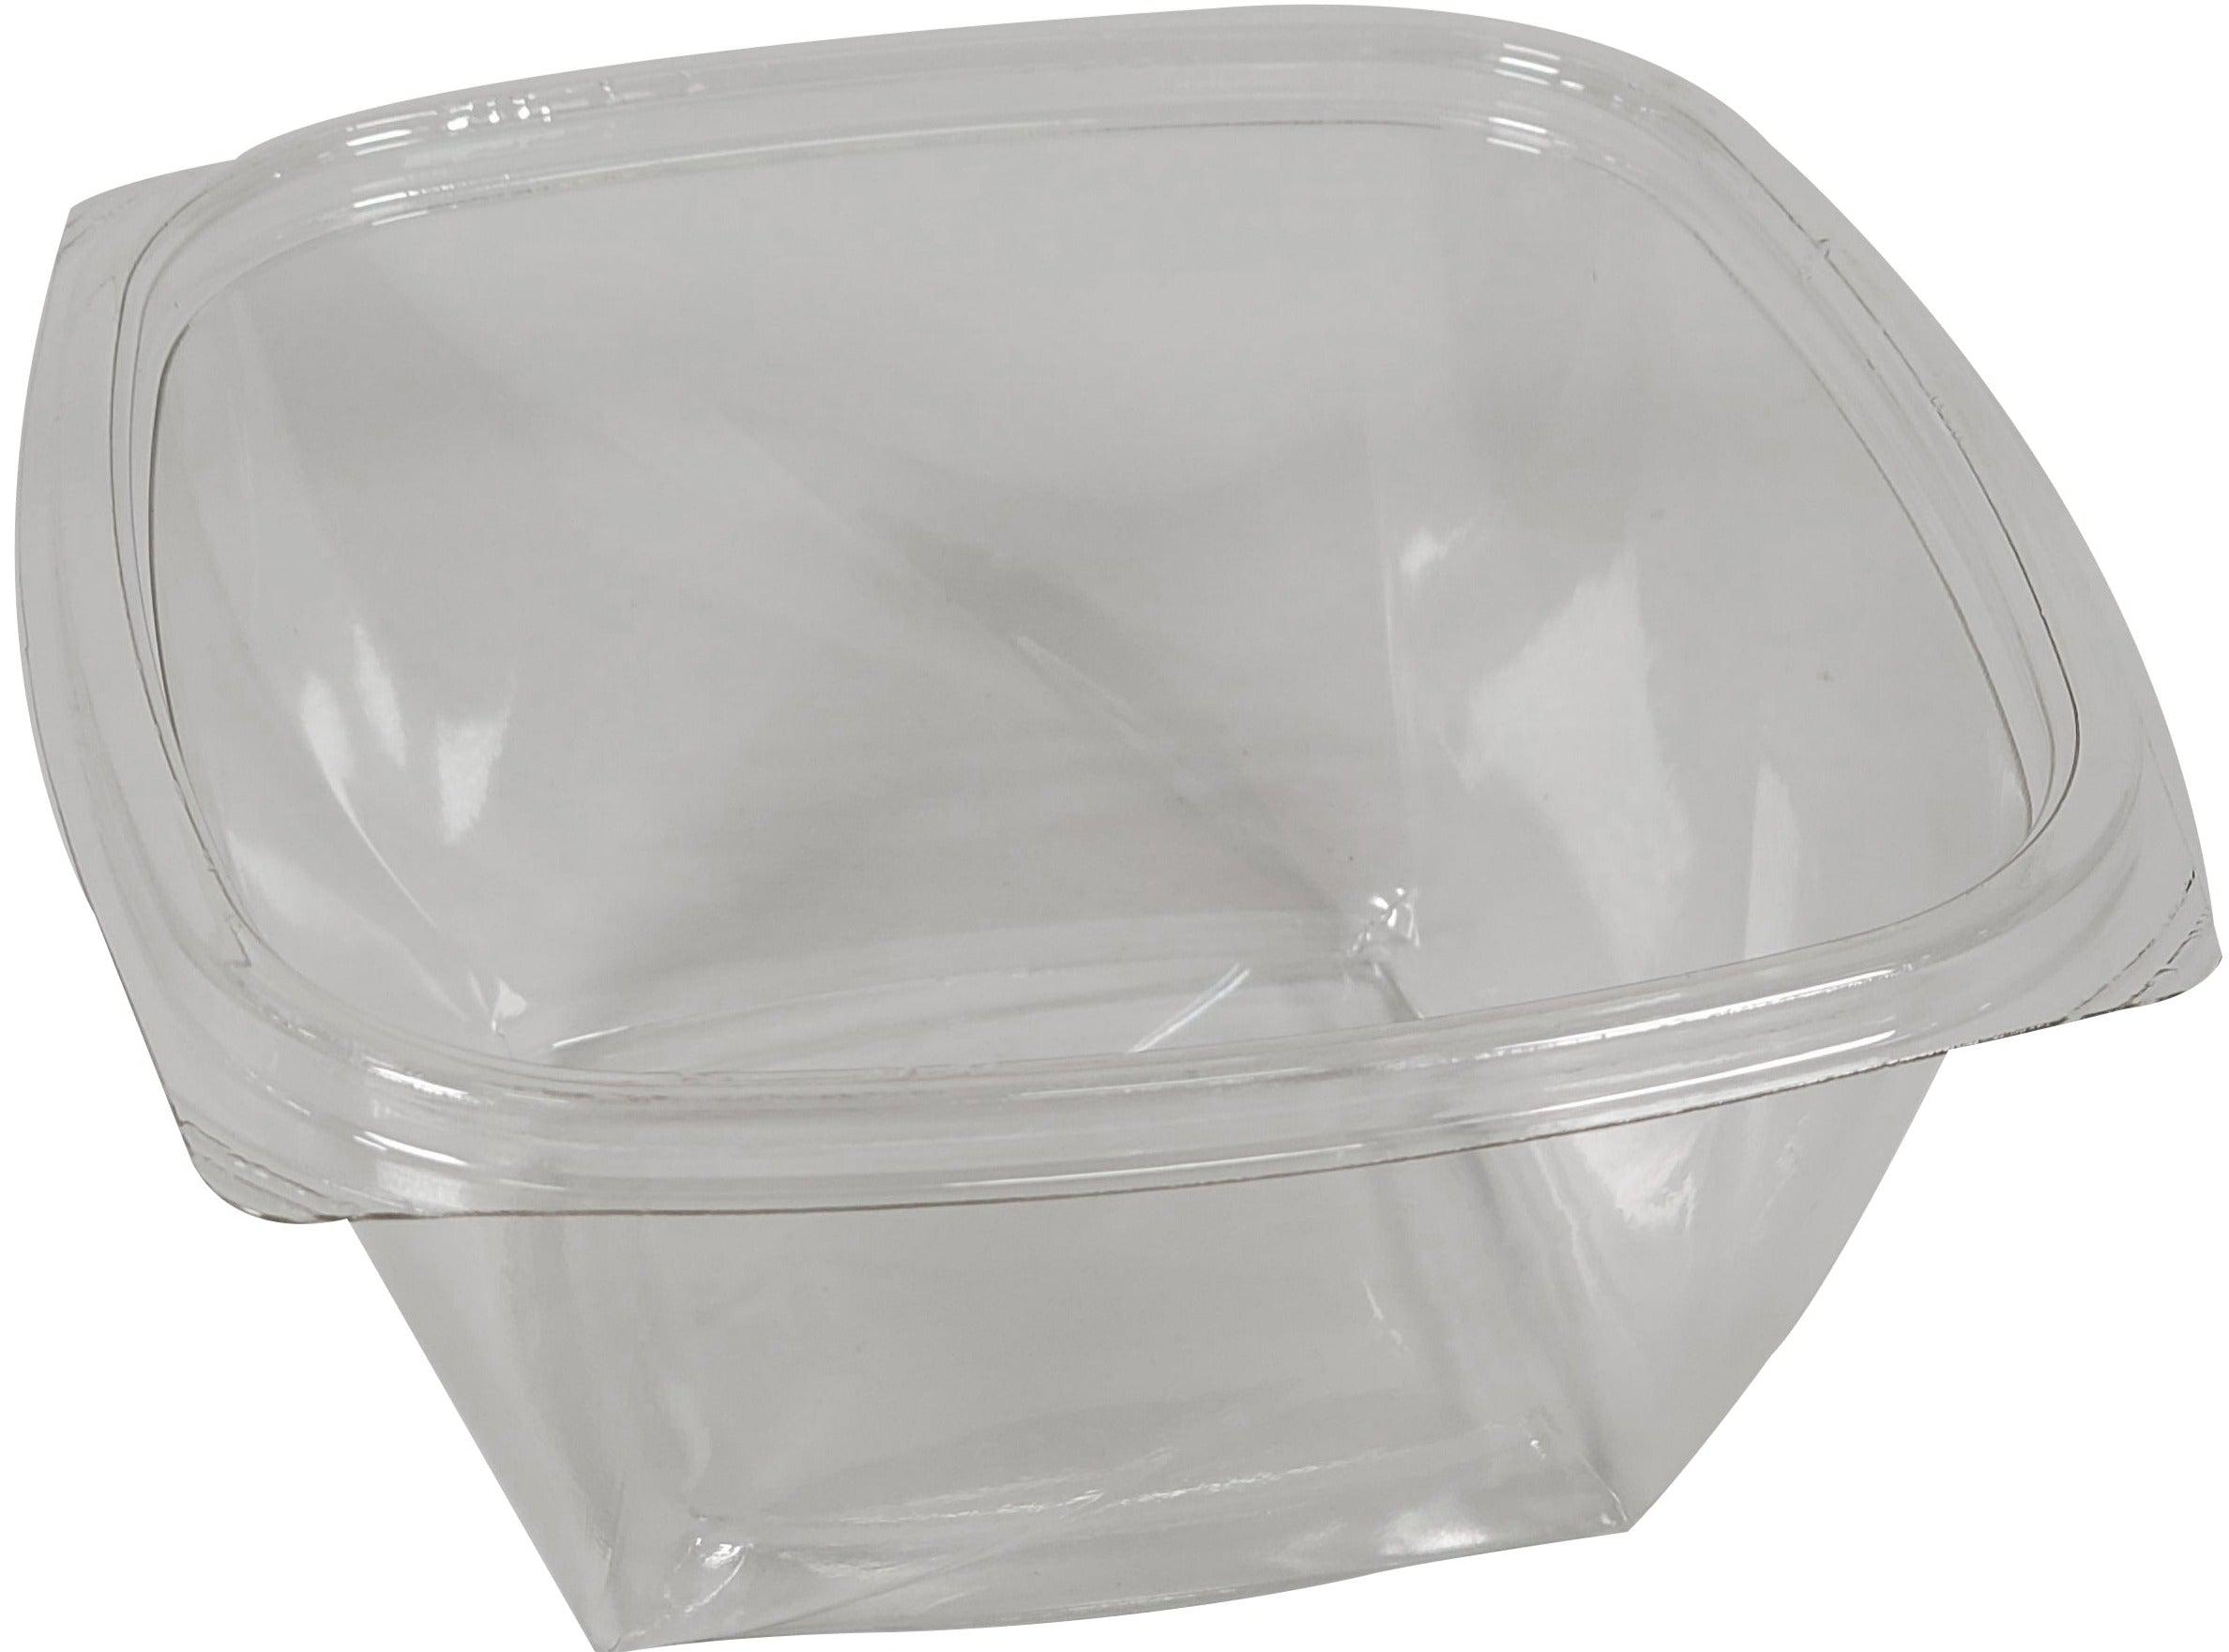 16oz Hinged Deli Containers - Medium 16 oz Hinged Deli Boxes - 200 count